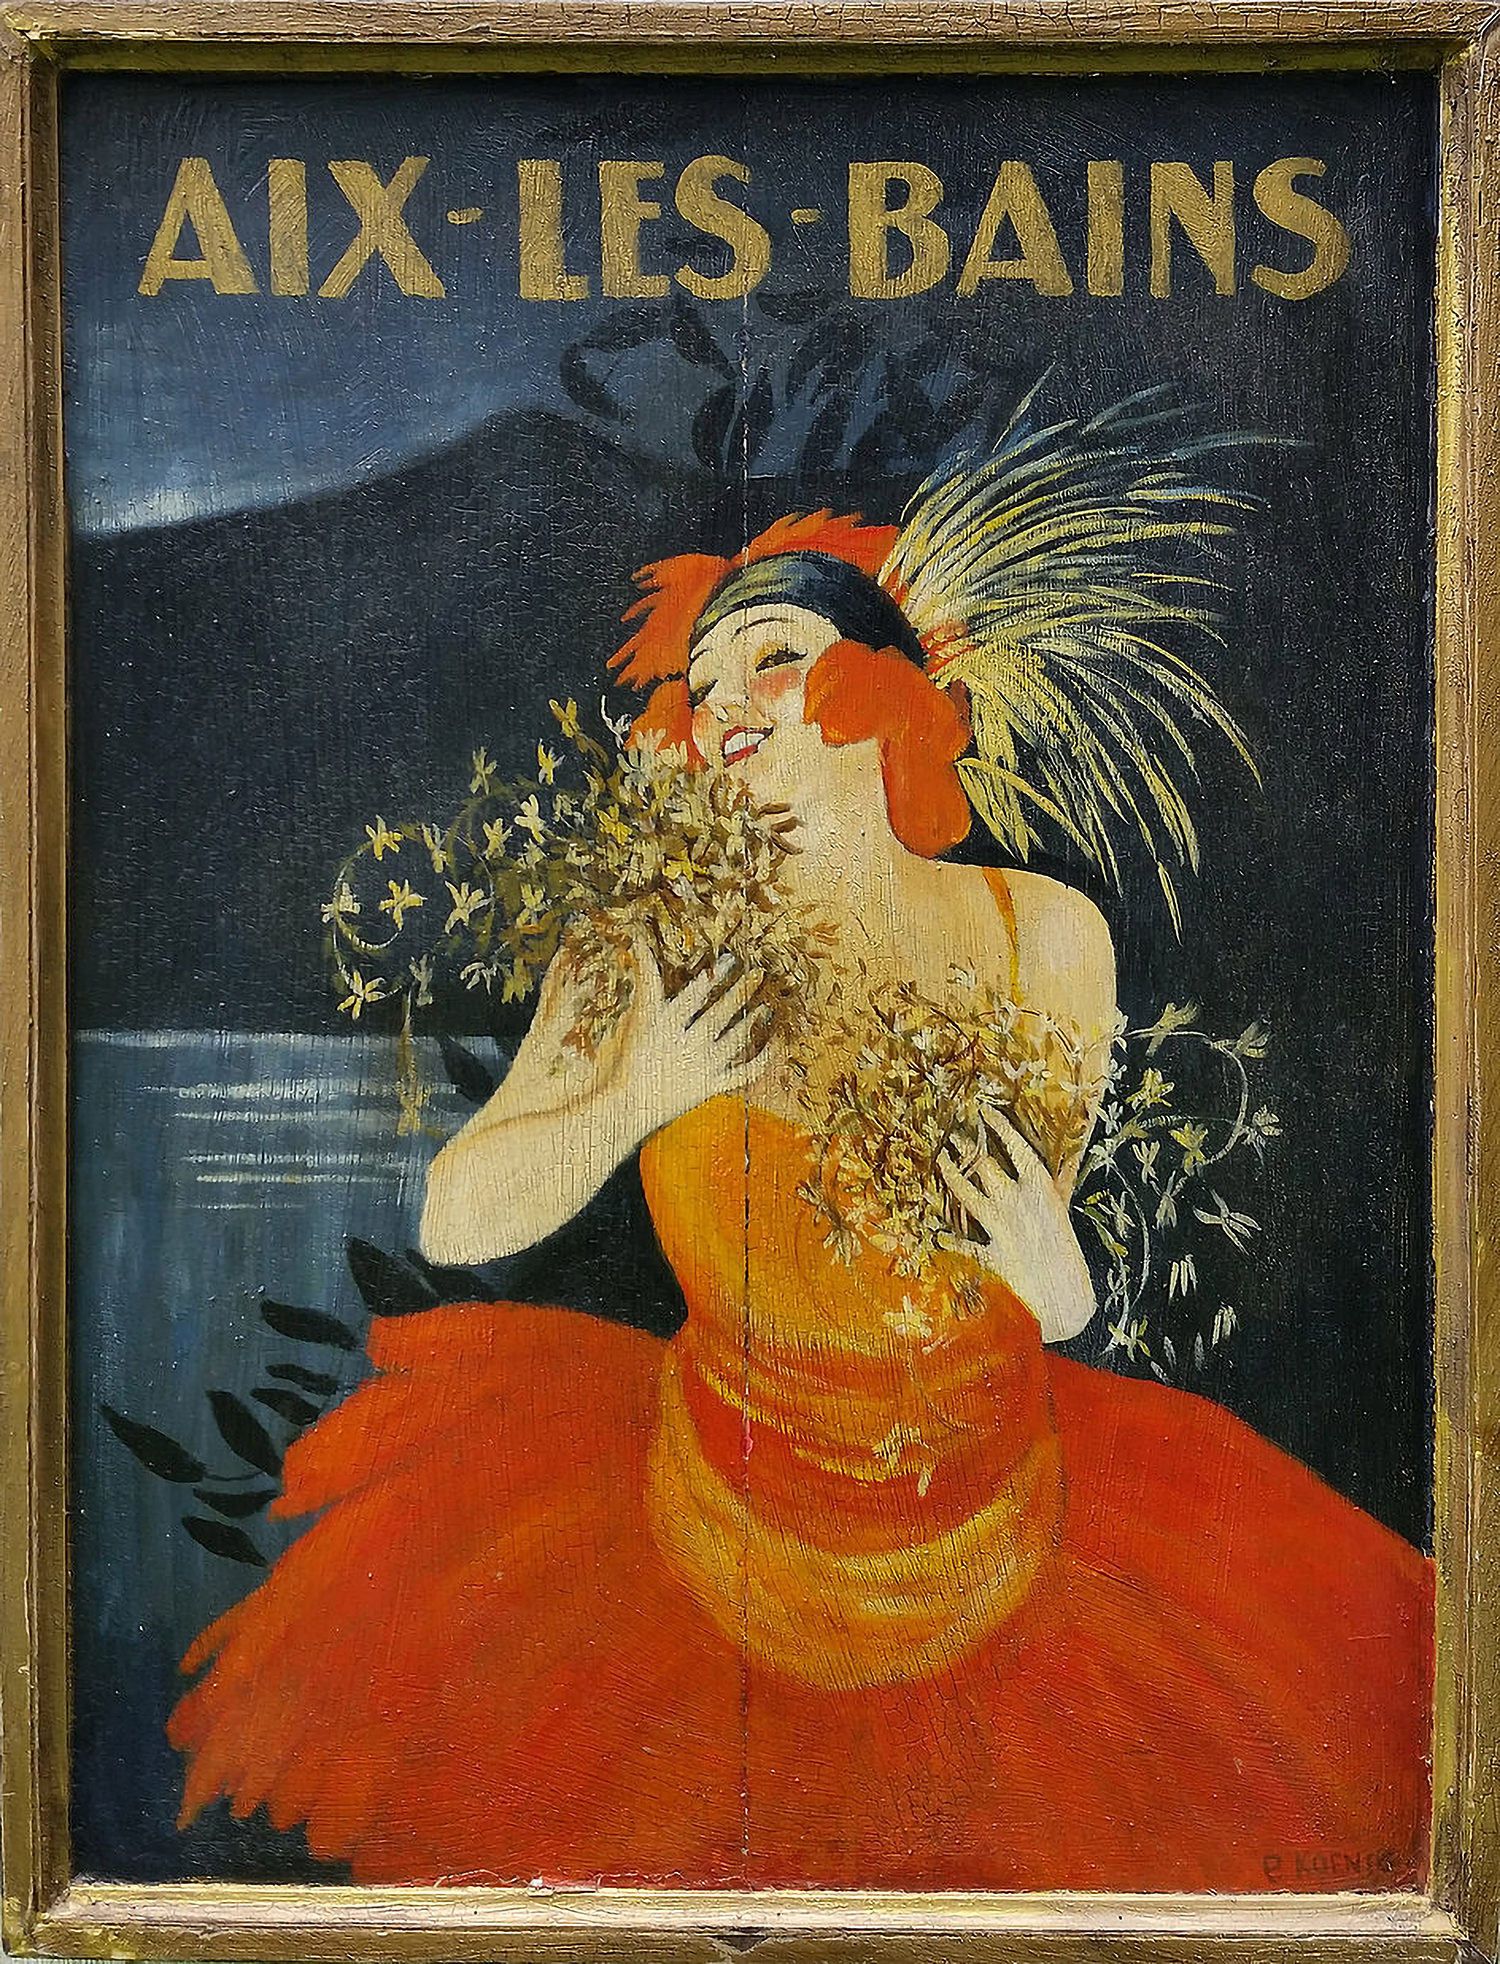 "Aix Les Bains" Late 19th century advertisement for a French resort in southern France still in existence today. Mixed media on pine.